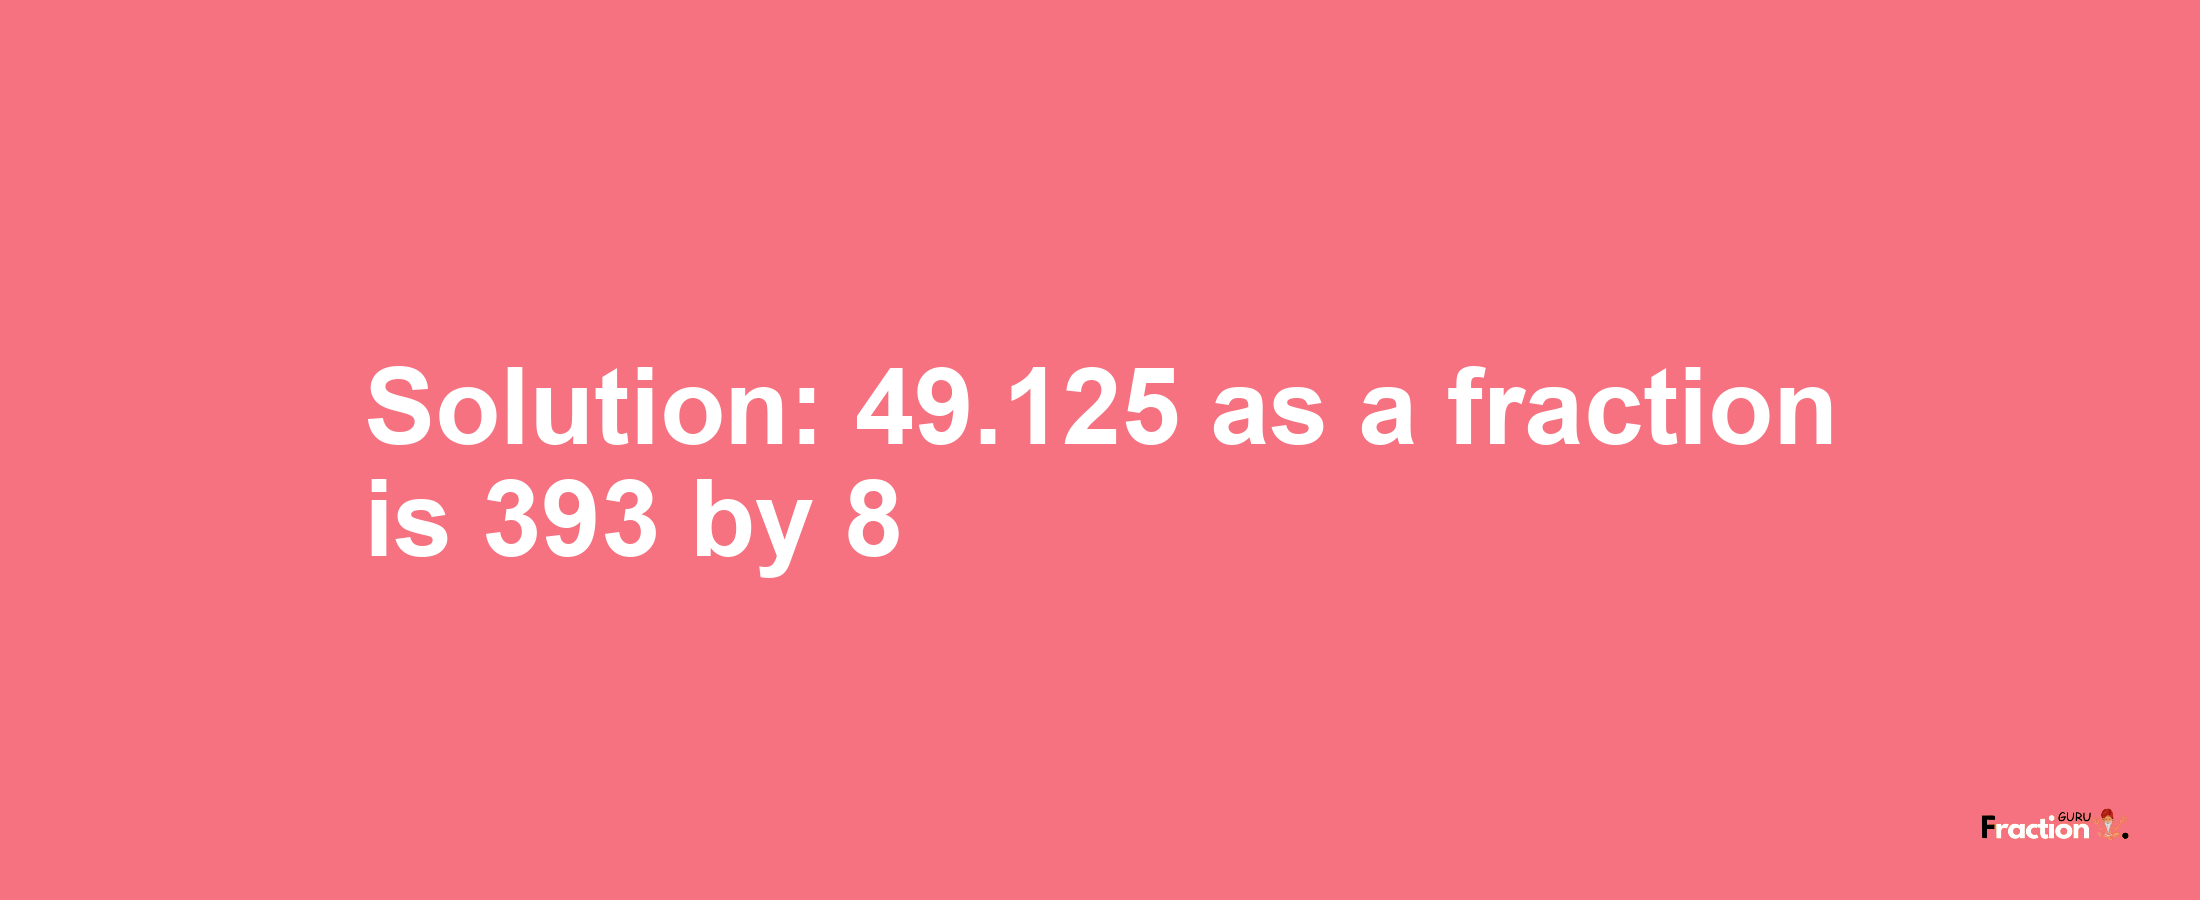 Solution:49.125 as a fraction is 393/8